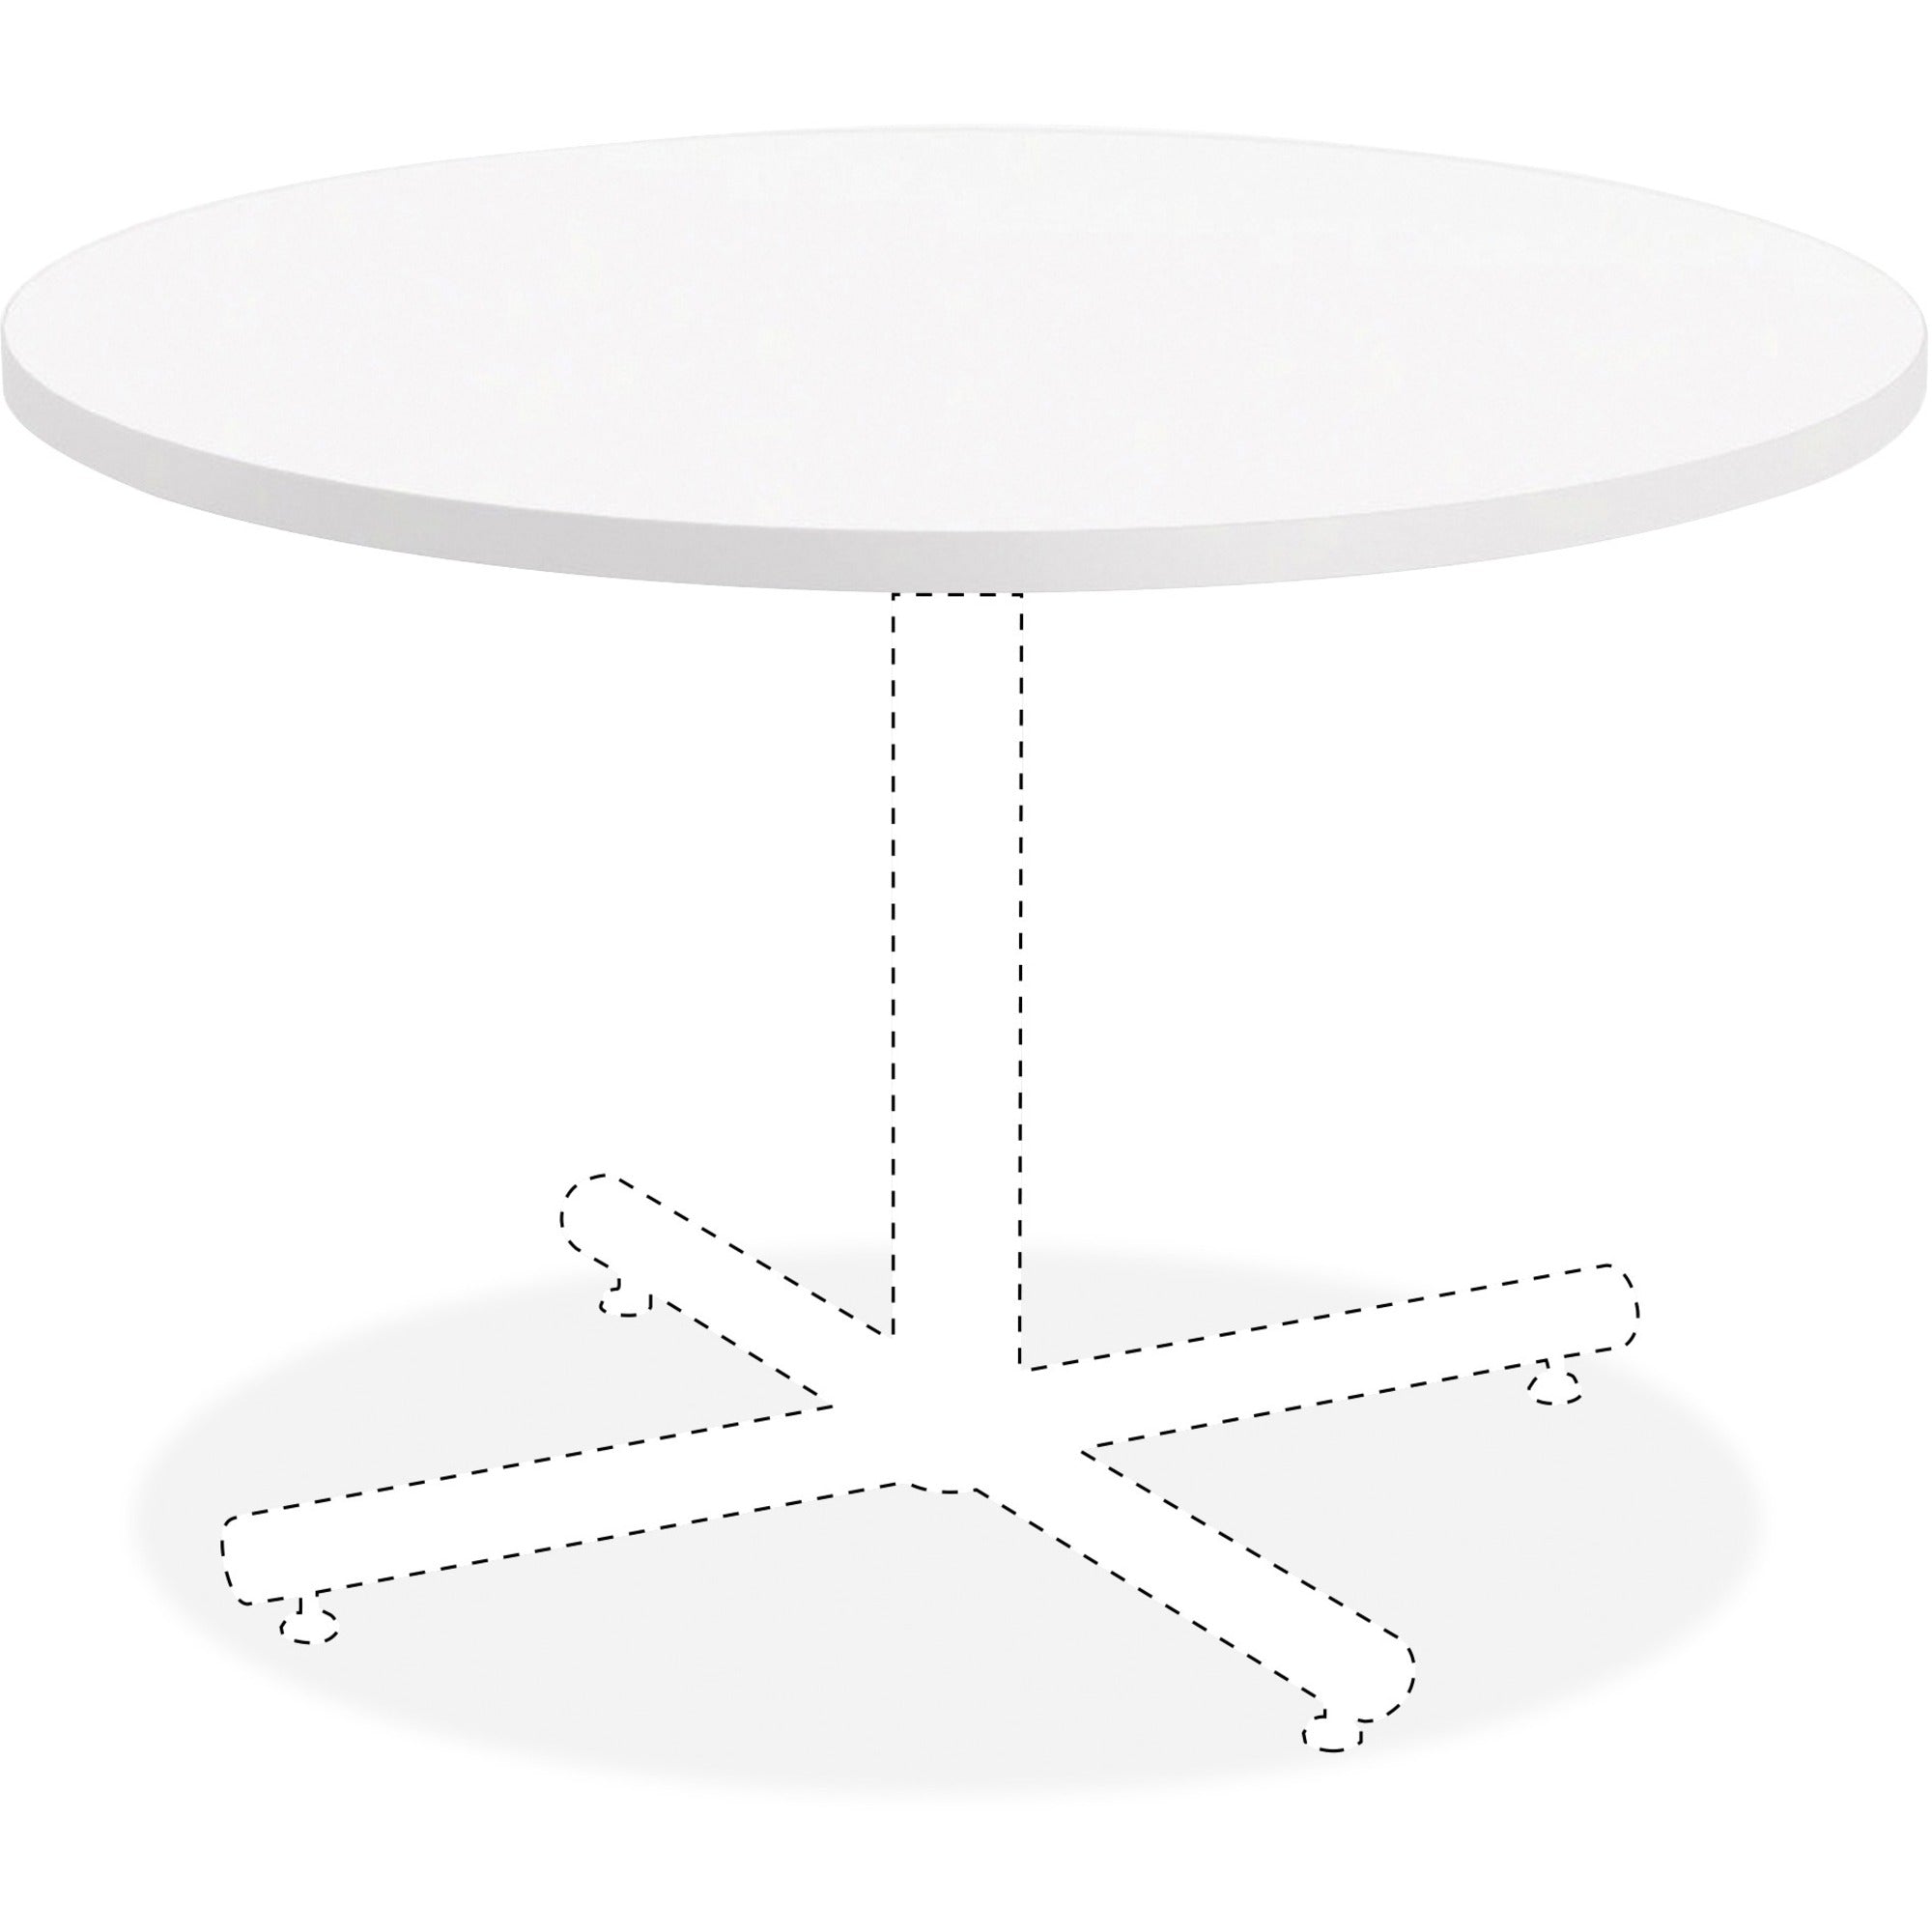 lorell-hospitality-collection-tabletop-for-table-tophigh-pressure-laminate-hpl-round-white-top-x-42-table-top-diameter-assembly-required-thermofused-laminate-tfl-particleboard-top-material-1-each_llr99857 - 1